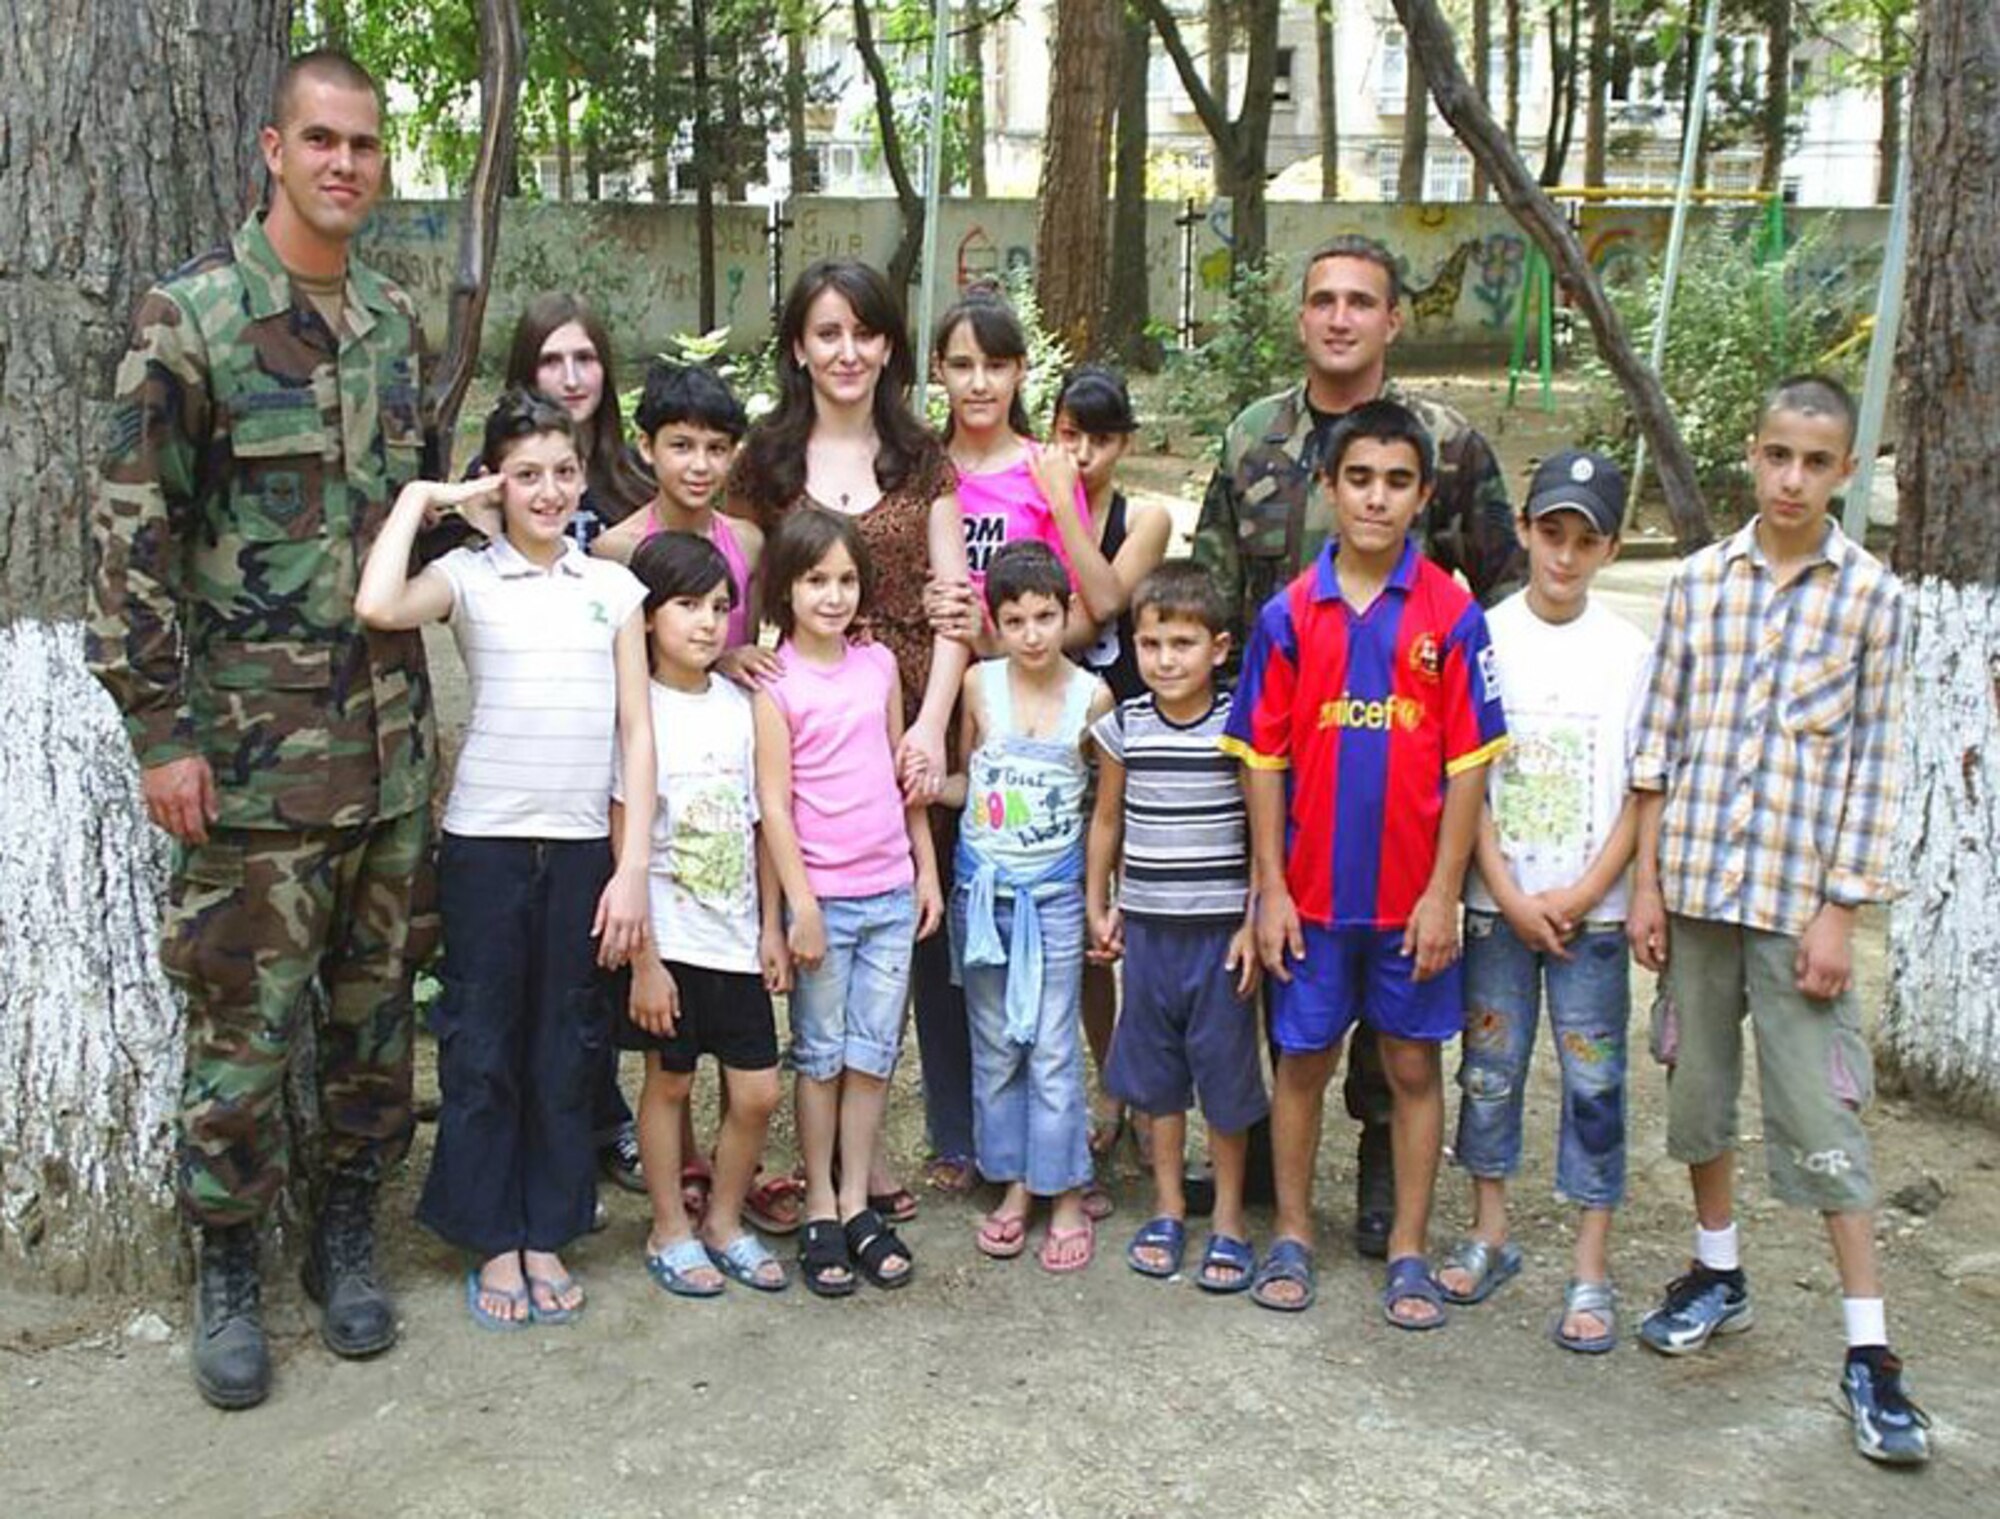 Staff Sergeant’s Paul Corcoran and Brian Leach, from Kentucky’s 123rd Contingency Response Group, pose for a photo while visiting an orphanage near Tblisi, Georgia, in September. The two sergeants deployed there with the 86th Contingency Response Group on a humanitarian mission following the Russian invasion into the area. (Photo courtesy of the 86th Contingency Response Group)